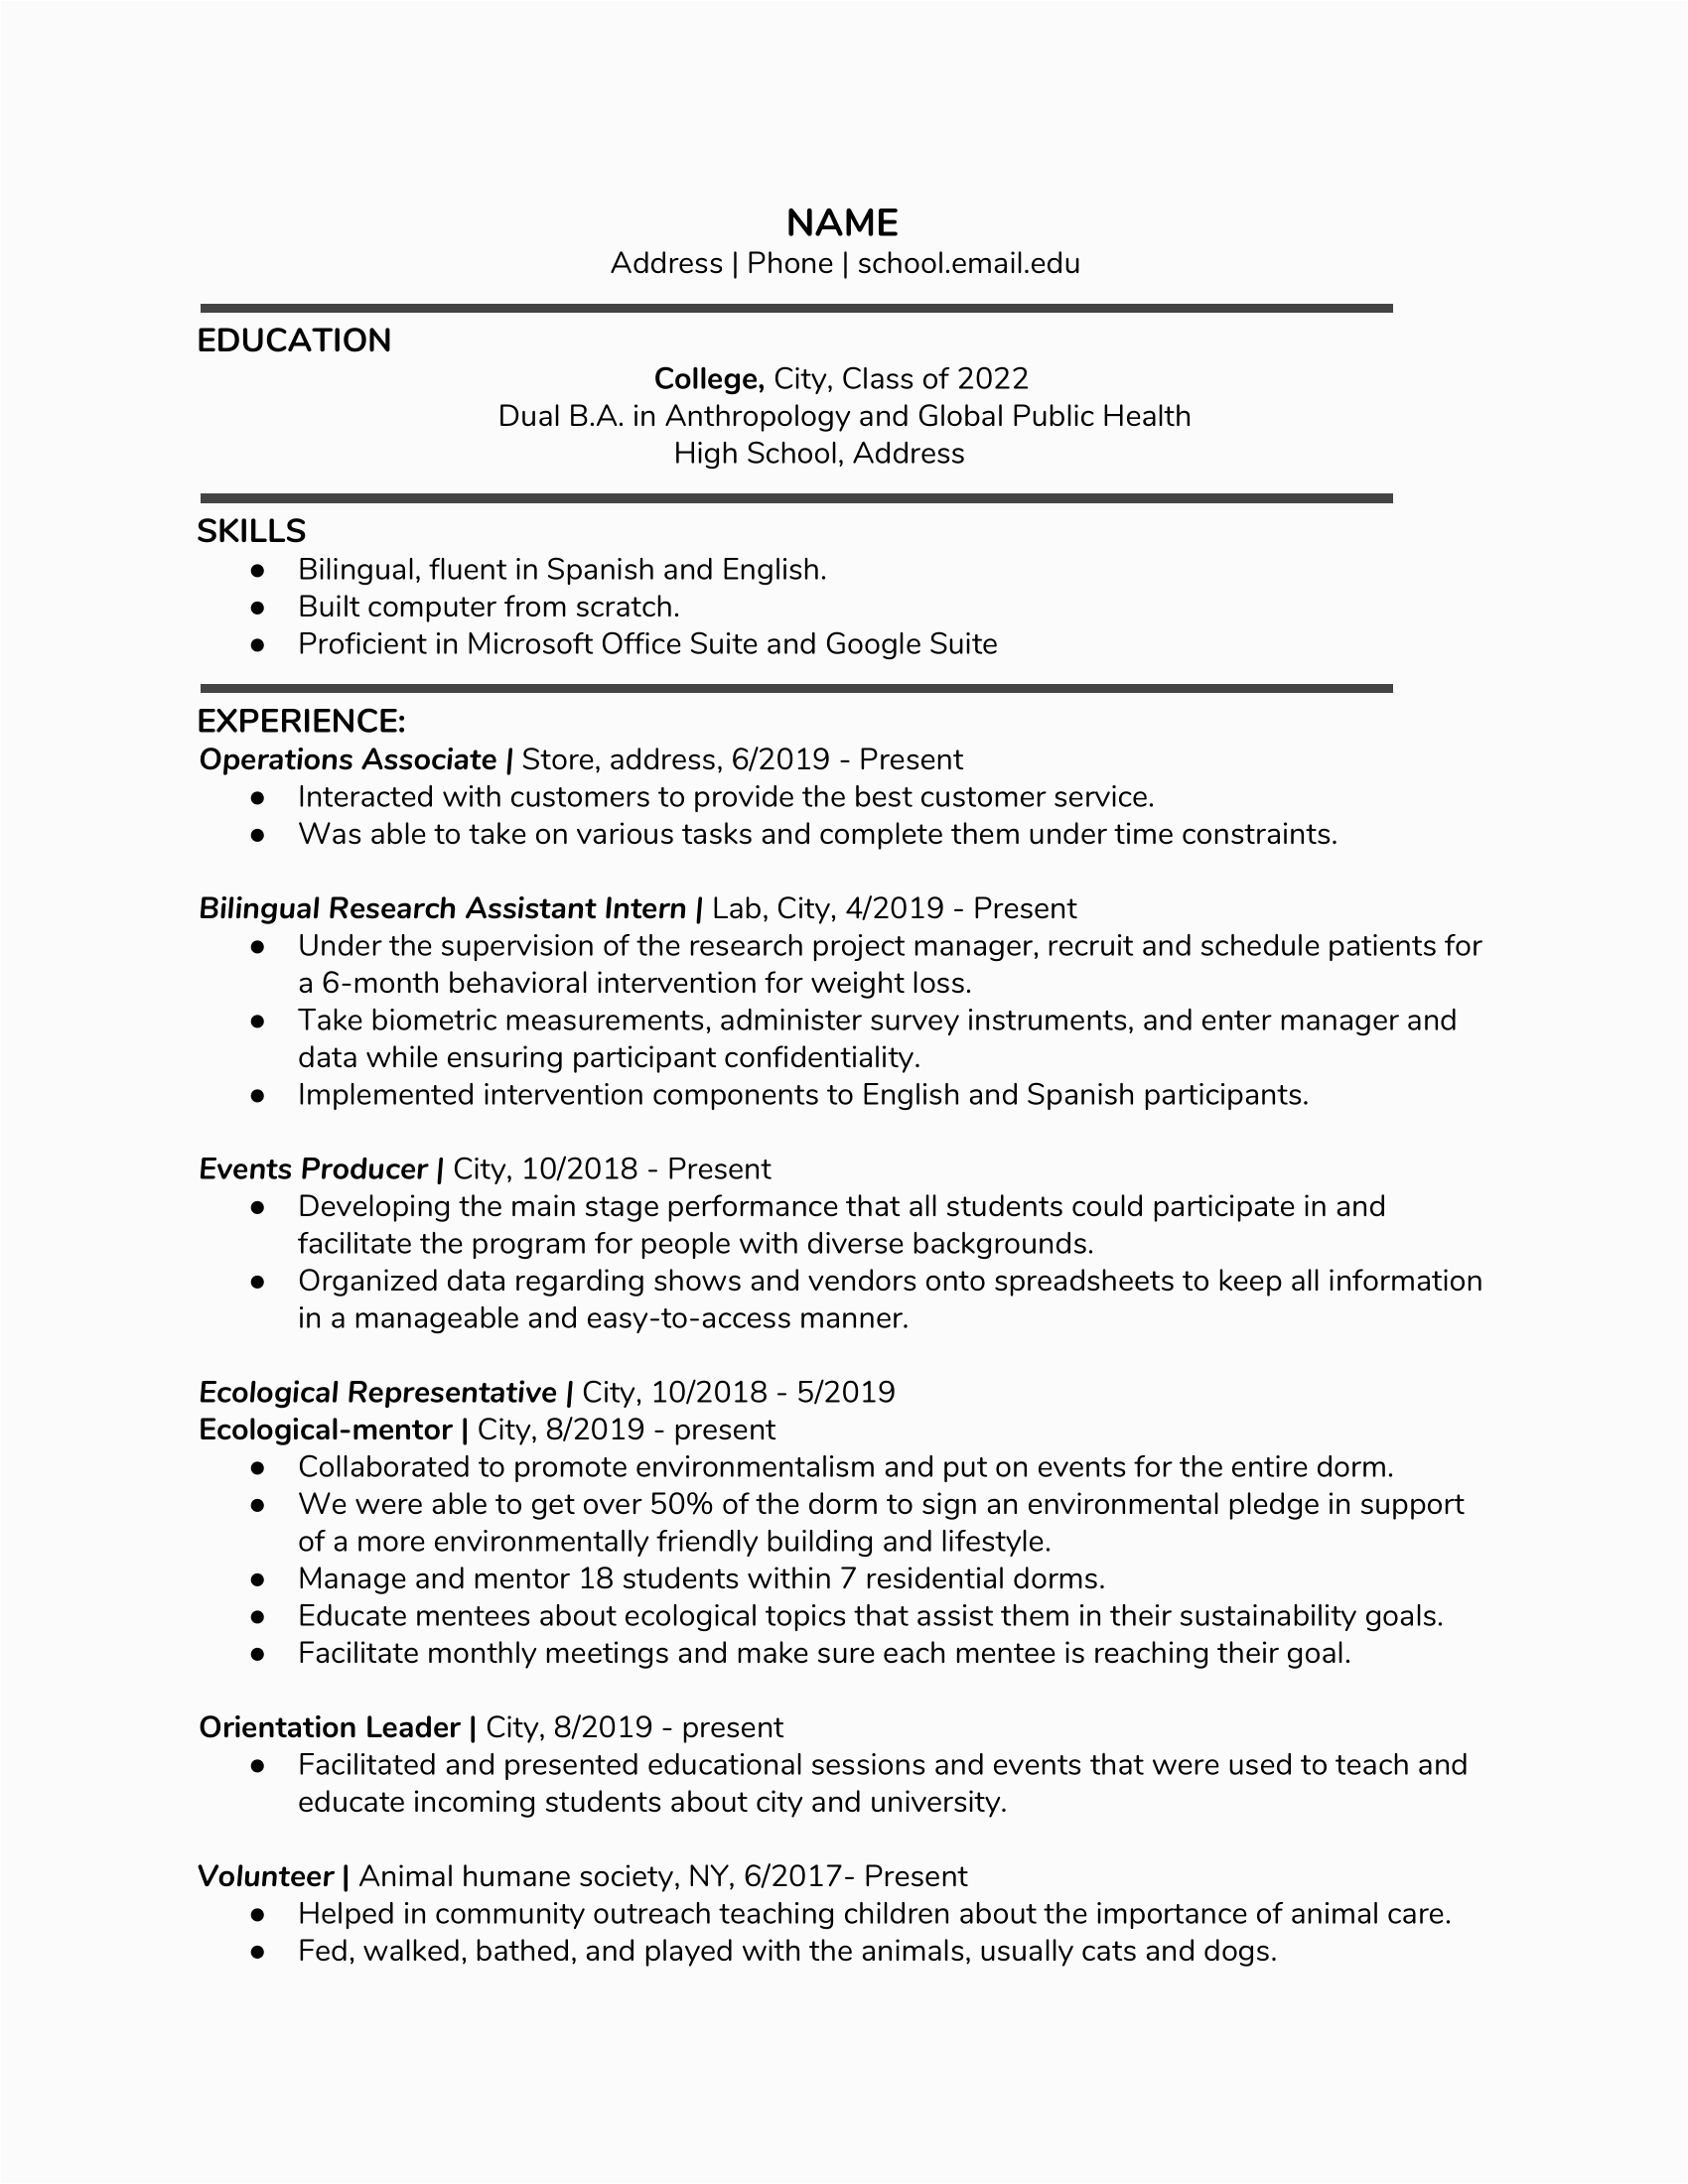 Sample Resume for sophomores In College College sophomore Trying to An Internship at A Local